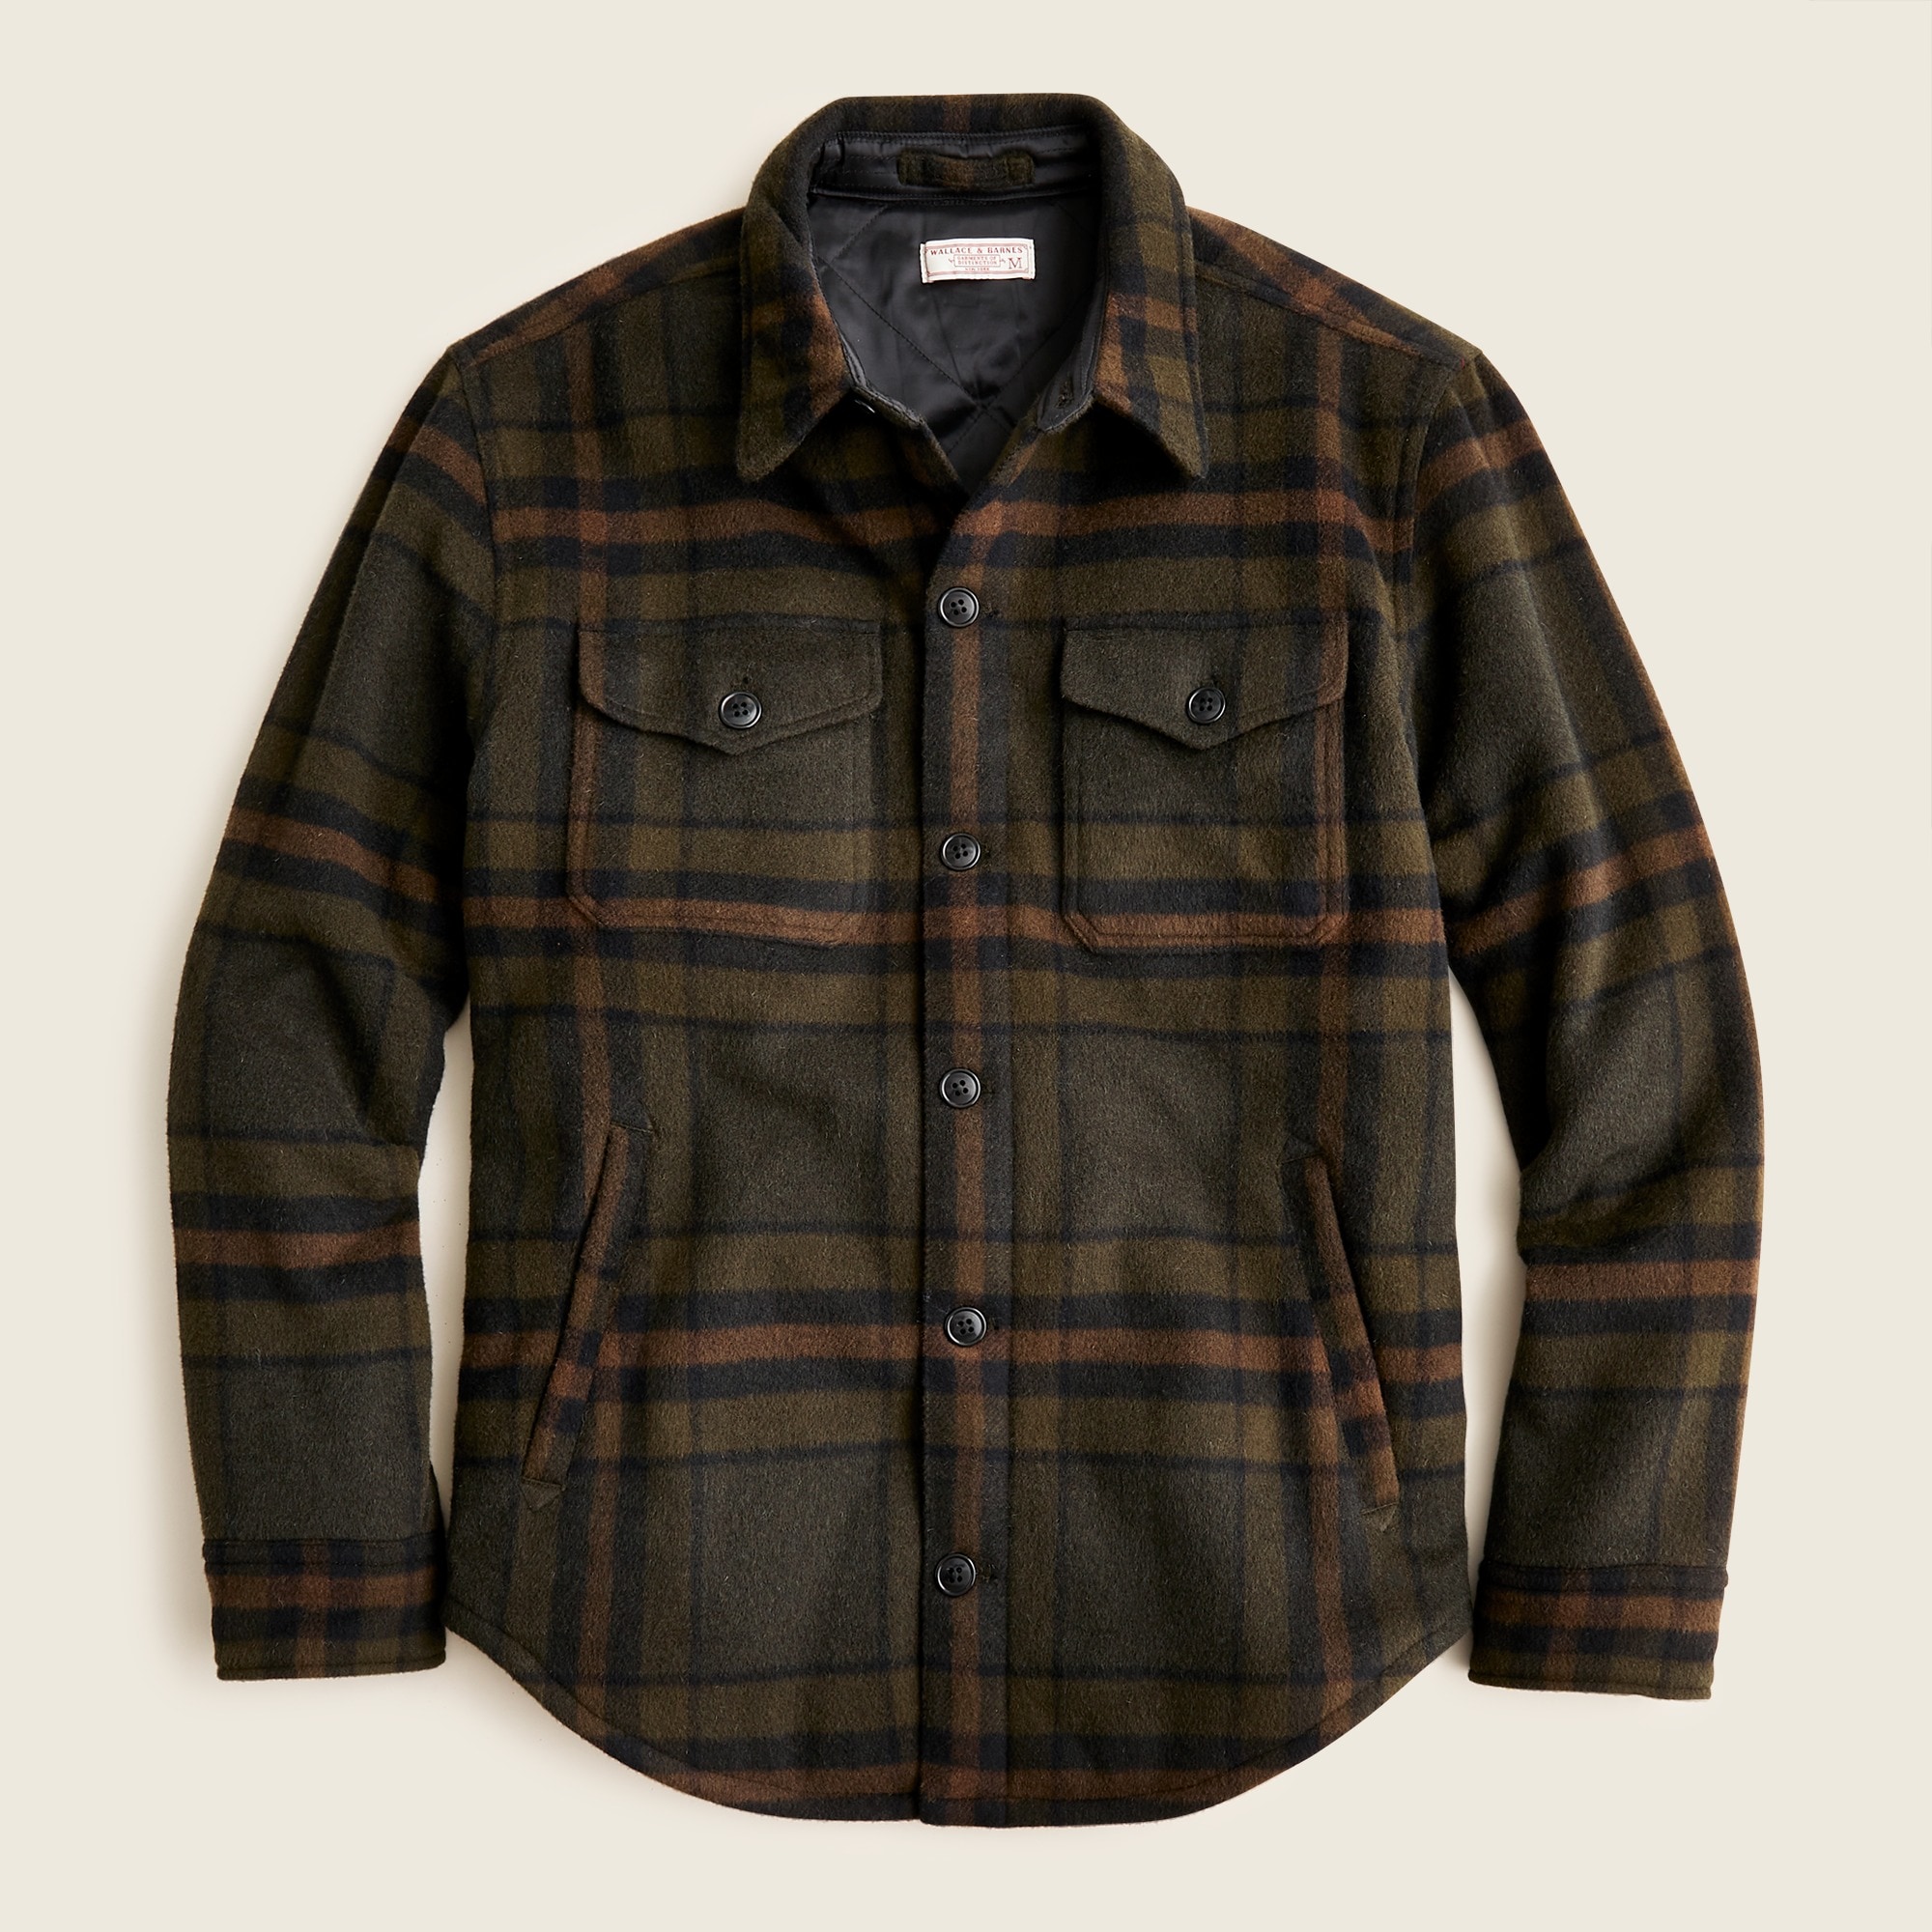 J.Crew: Wallace & Barnes Lined Brushed Wool Shirt-jacket In Plaid